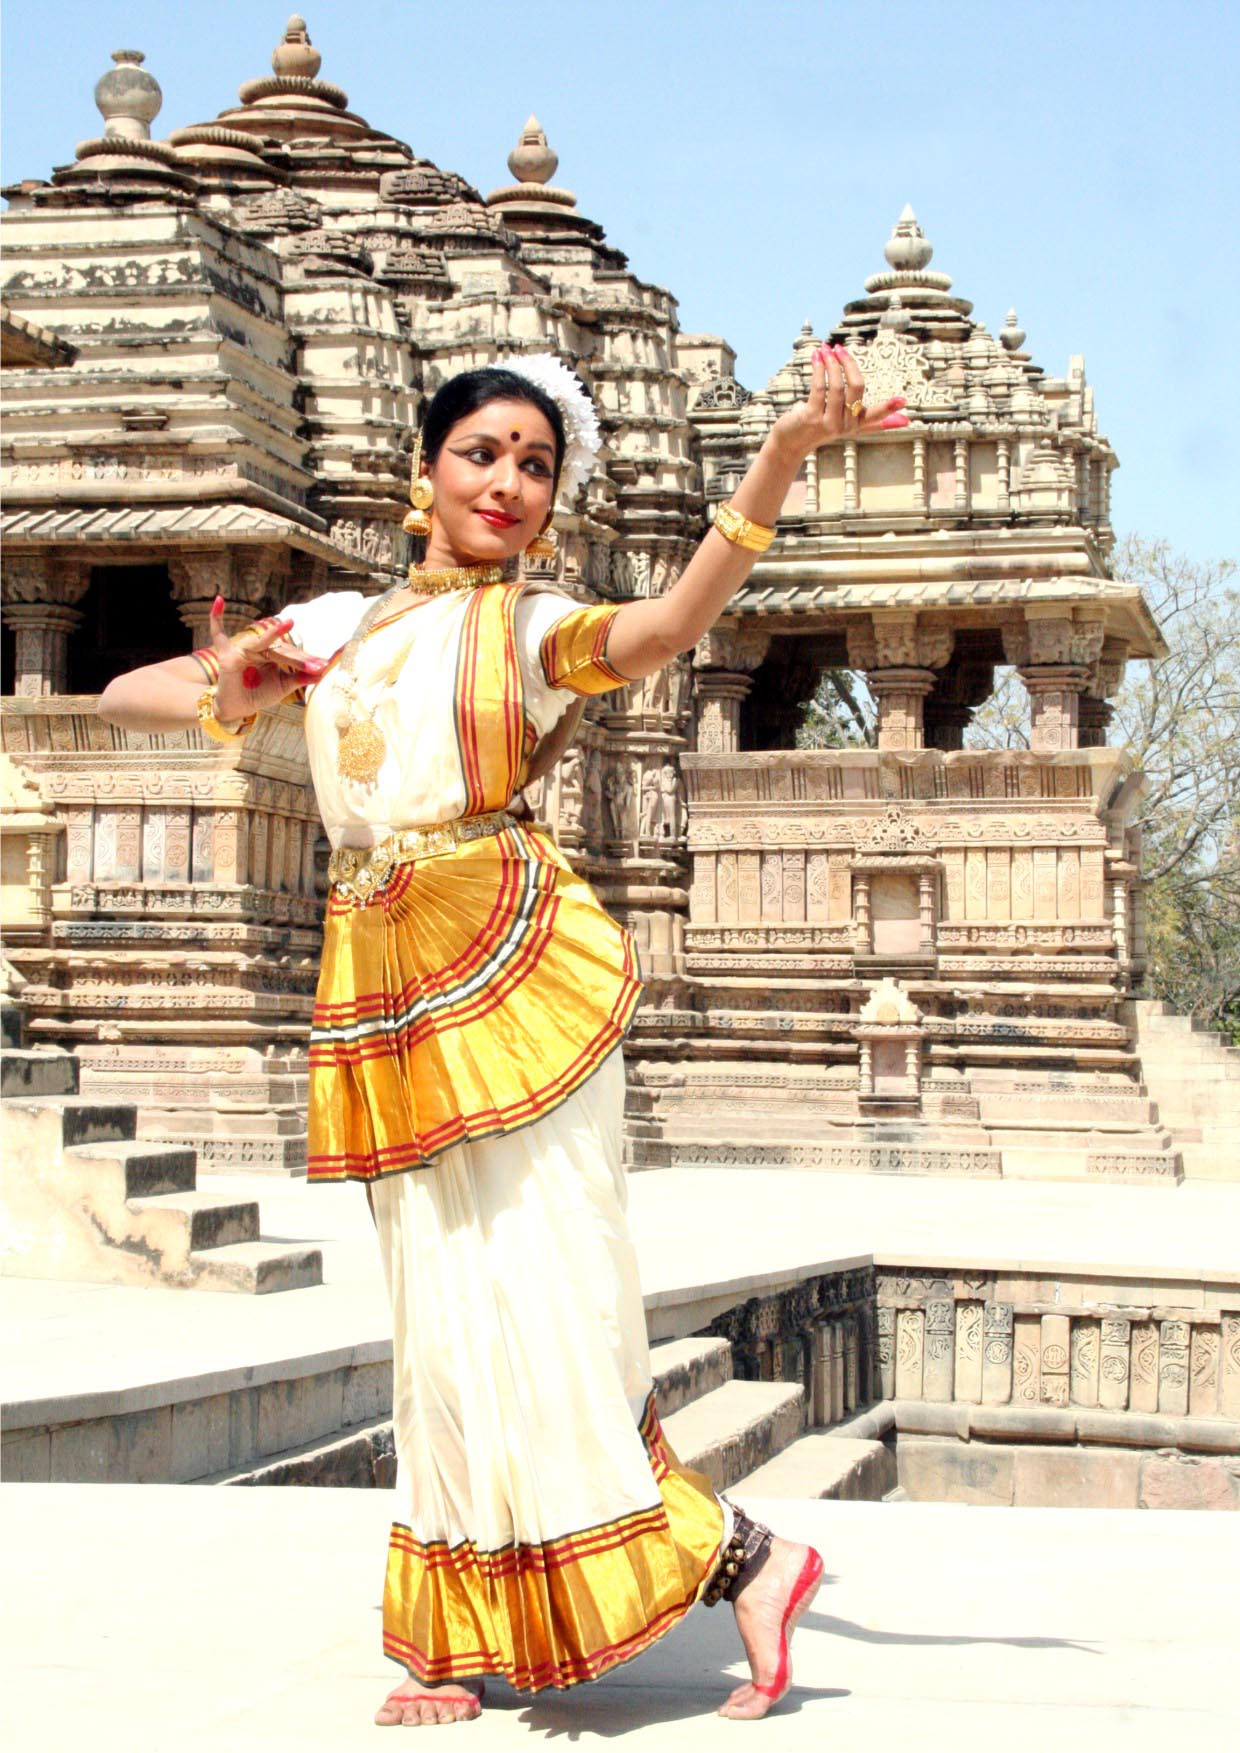 Classical Indian Dance Incorporates a Traditional Aesthetic with Contemporary Social Activism